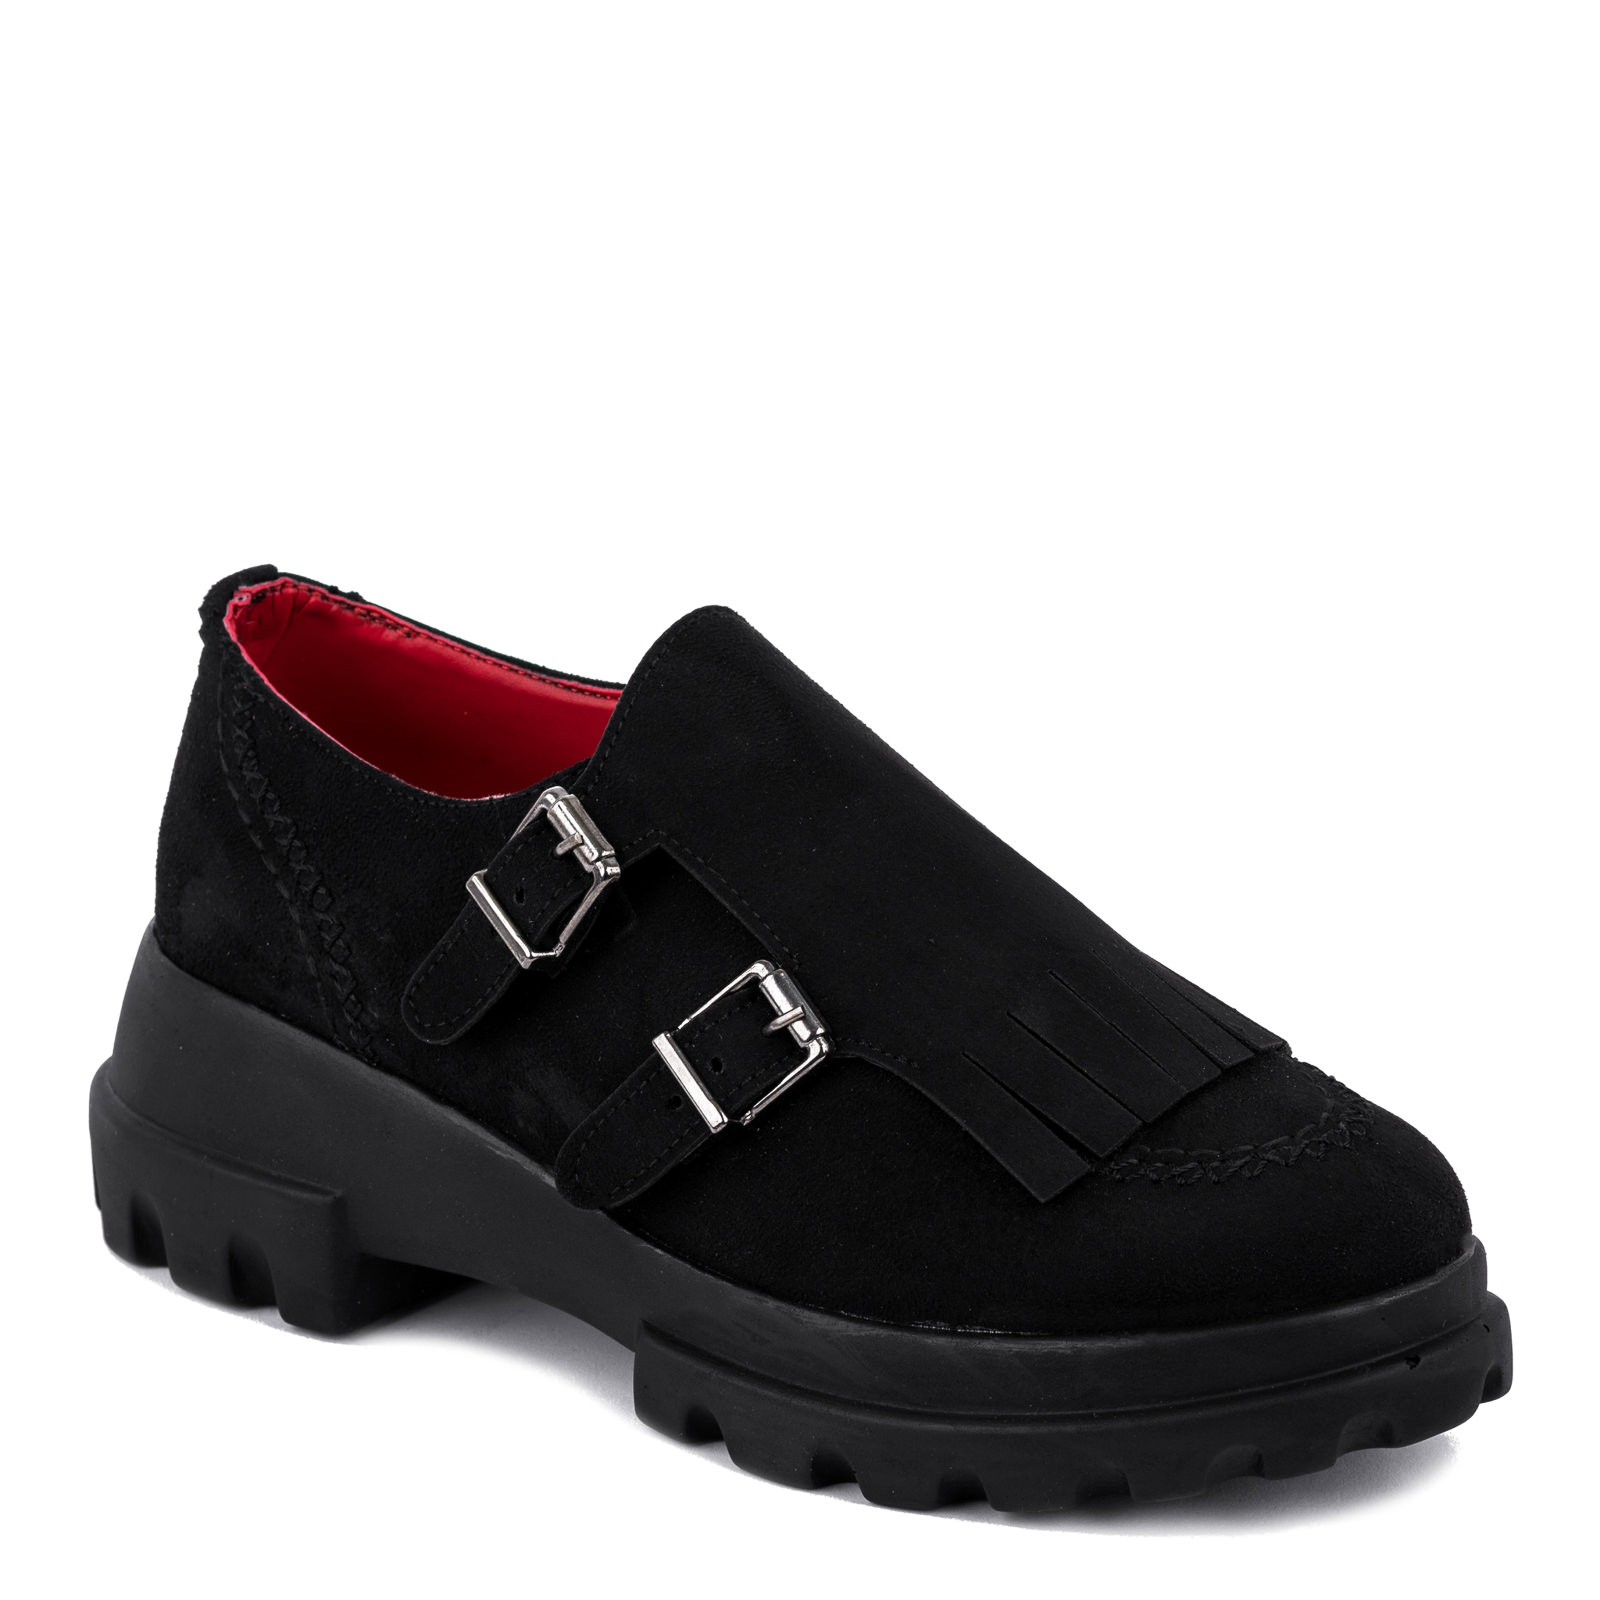 VELOUR SHOES WITH BELTS - BLACK